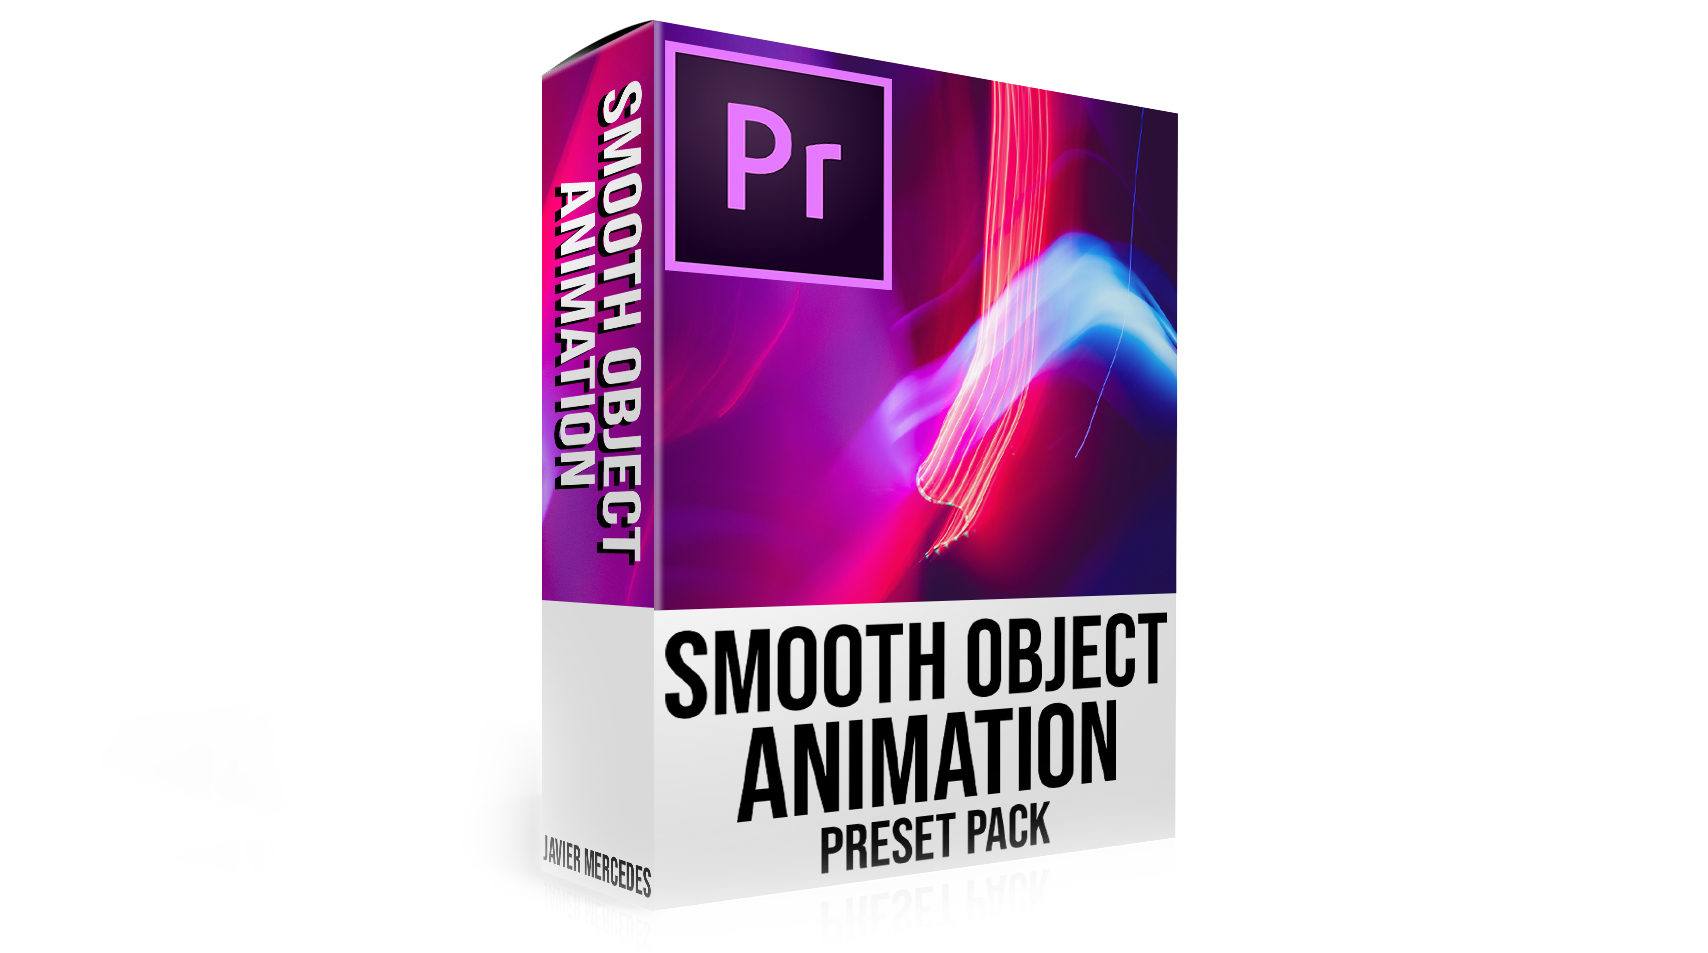 Smooth Object Animation Preset Pack - Adobe Premiere Pro — JAVIER MERCEDES